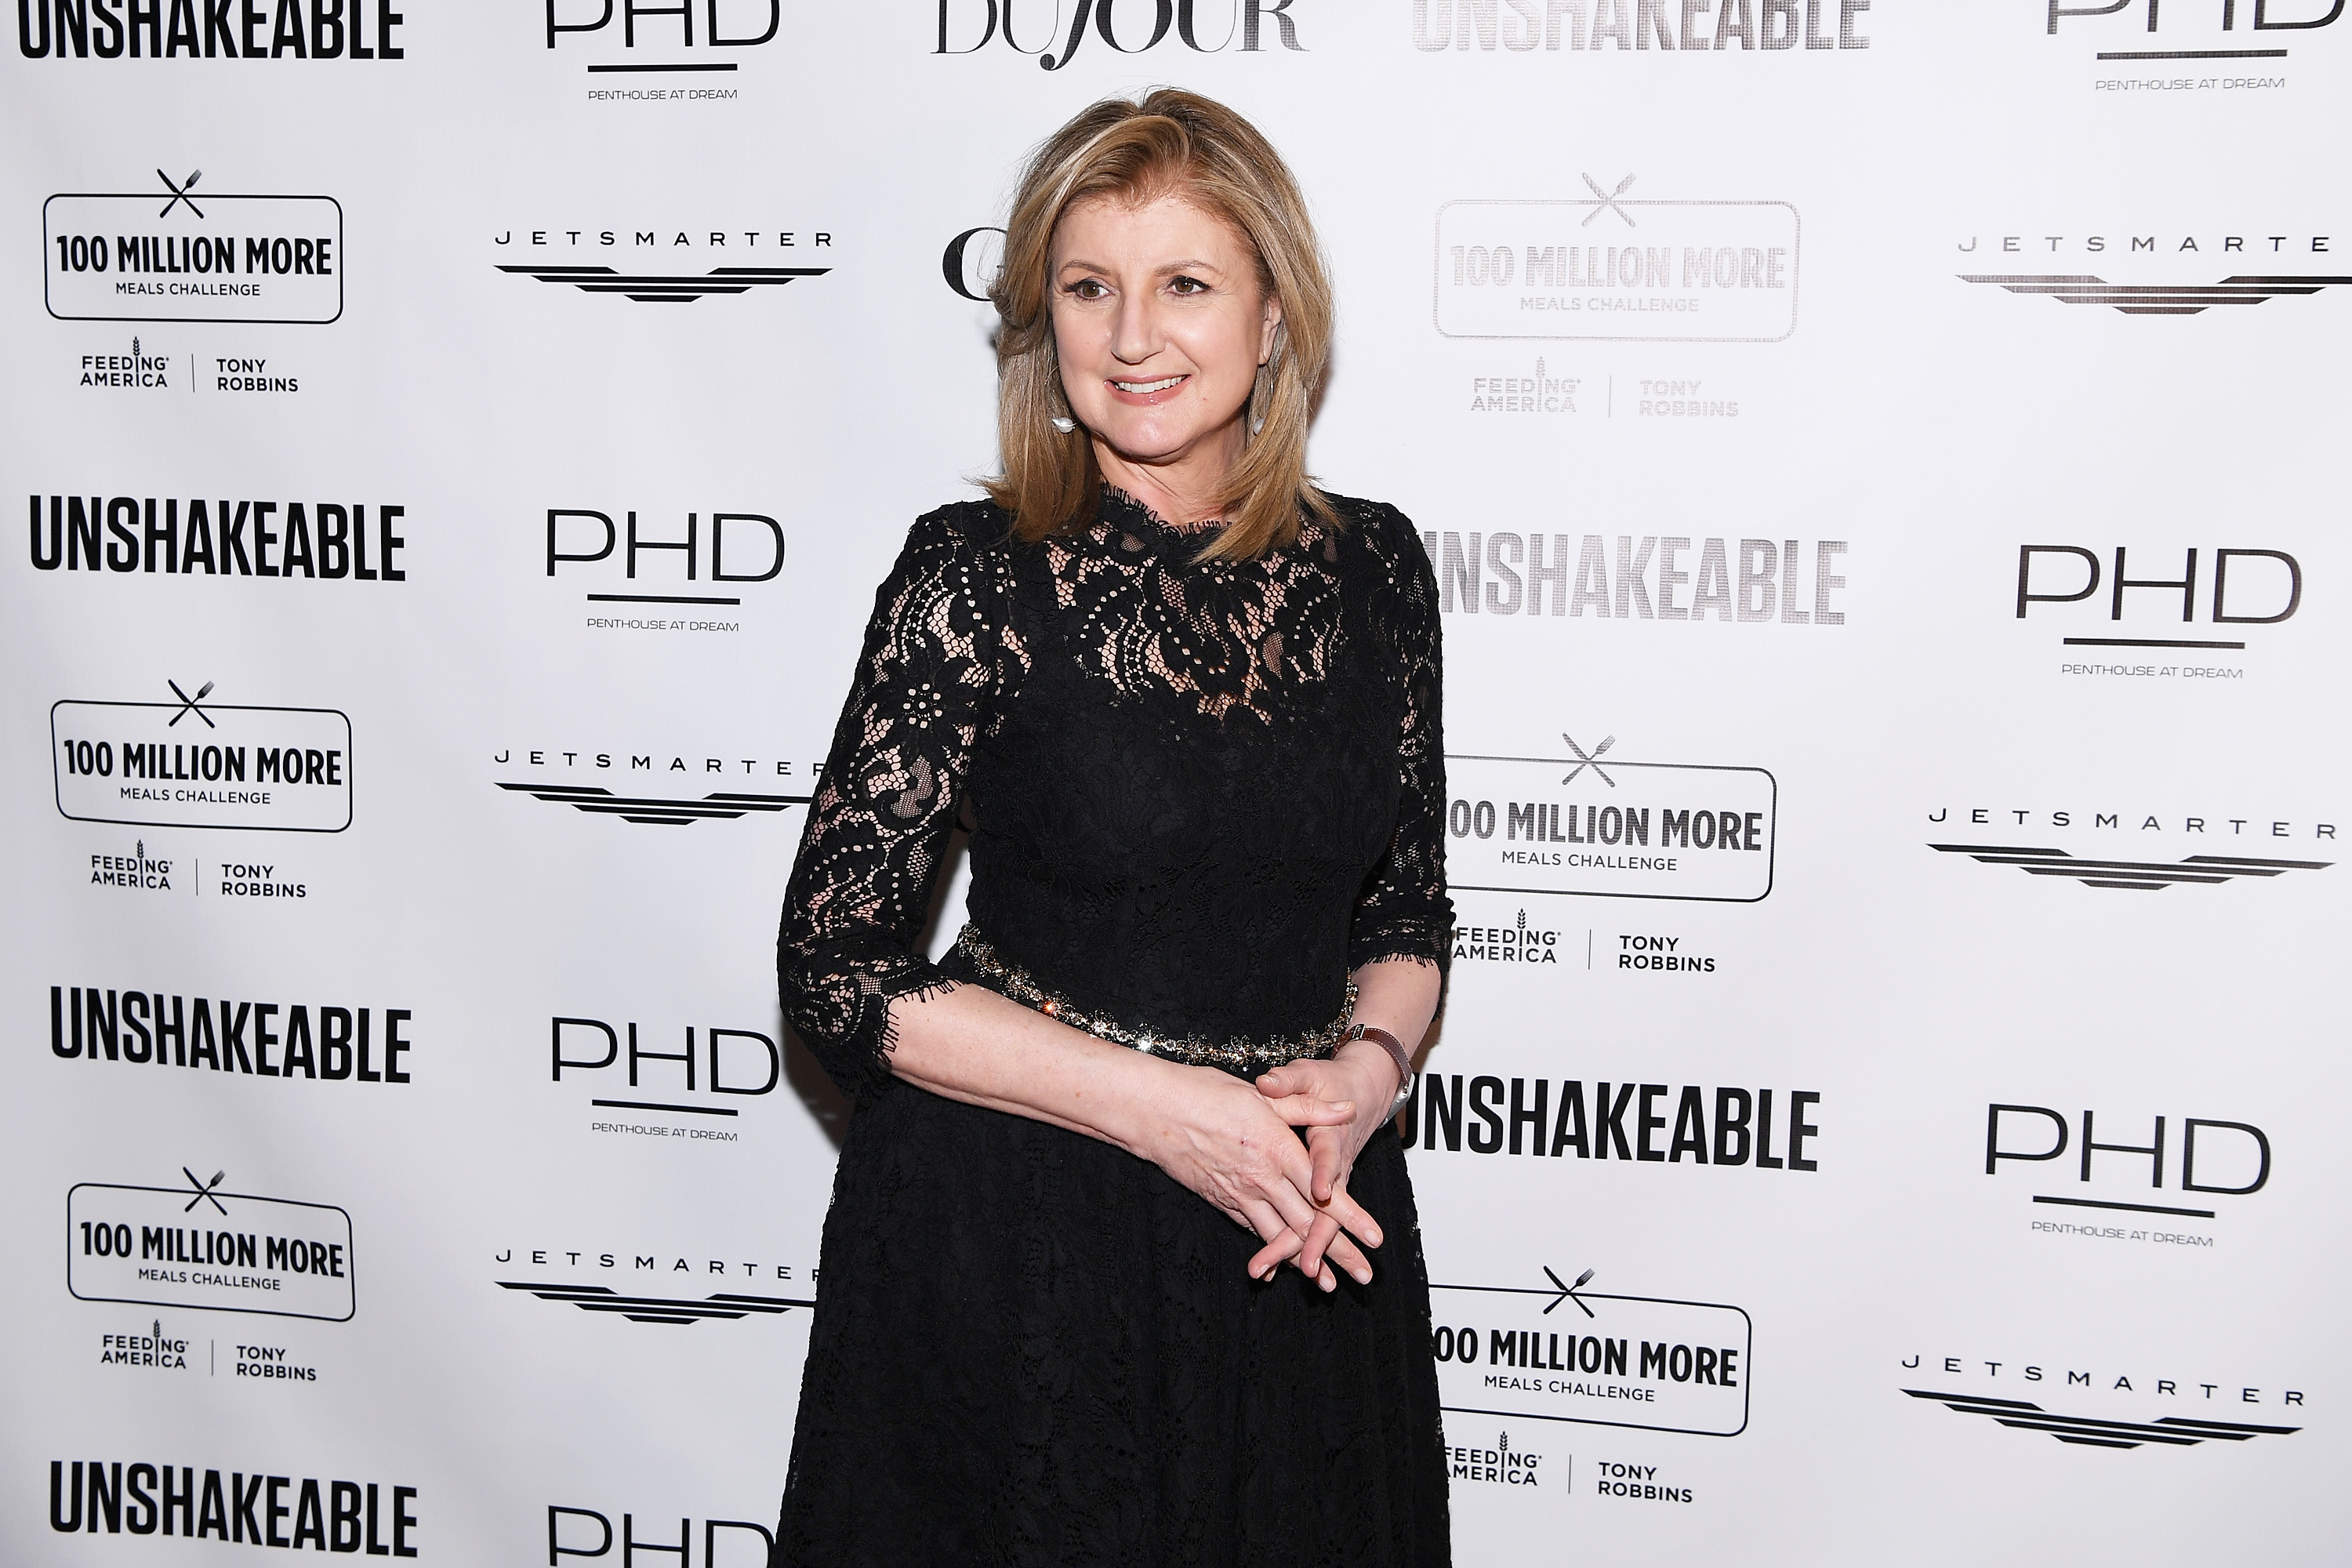 NEW YORK, NY - FEBRUARY 27:  Author Arianna Huffington attends Tony Robbins' Birthday celebration and book launch of "UNSHAKEABLE" presented by DuJour, Gilt and JetSmarter at PH-D Rooftop Lounge at Dream Downtown on February 27, 2017 in New York City.  (Photo by Dave Kotinsky/Getty Images for DuJour) (Dave Kotinsky&mdash;Getty Images for DuJour)